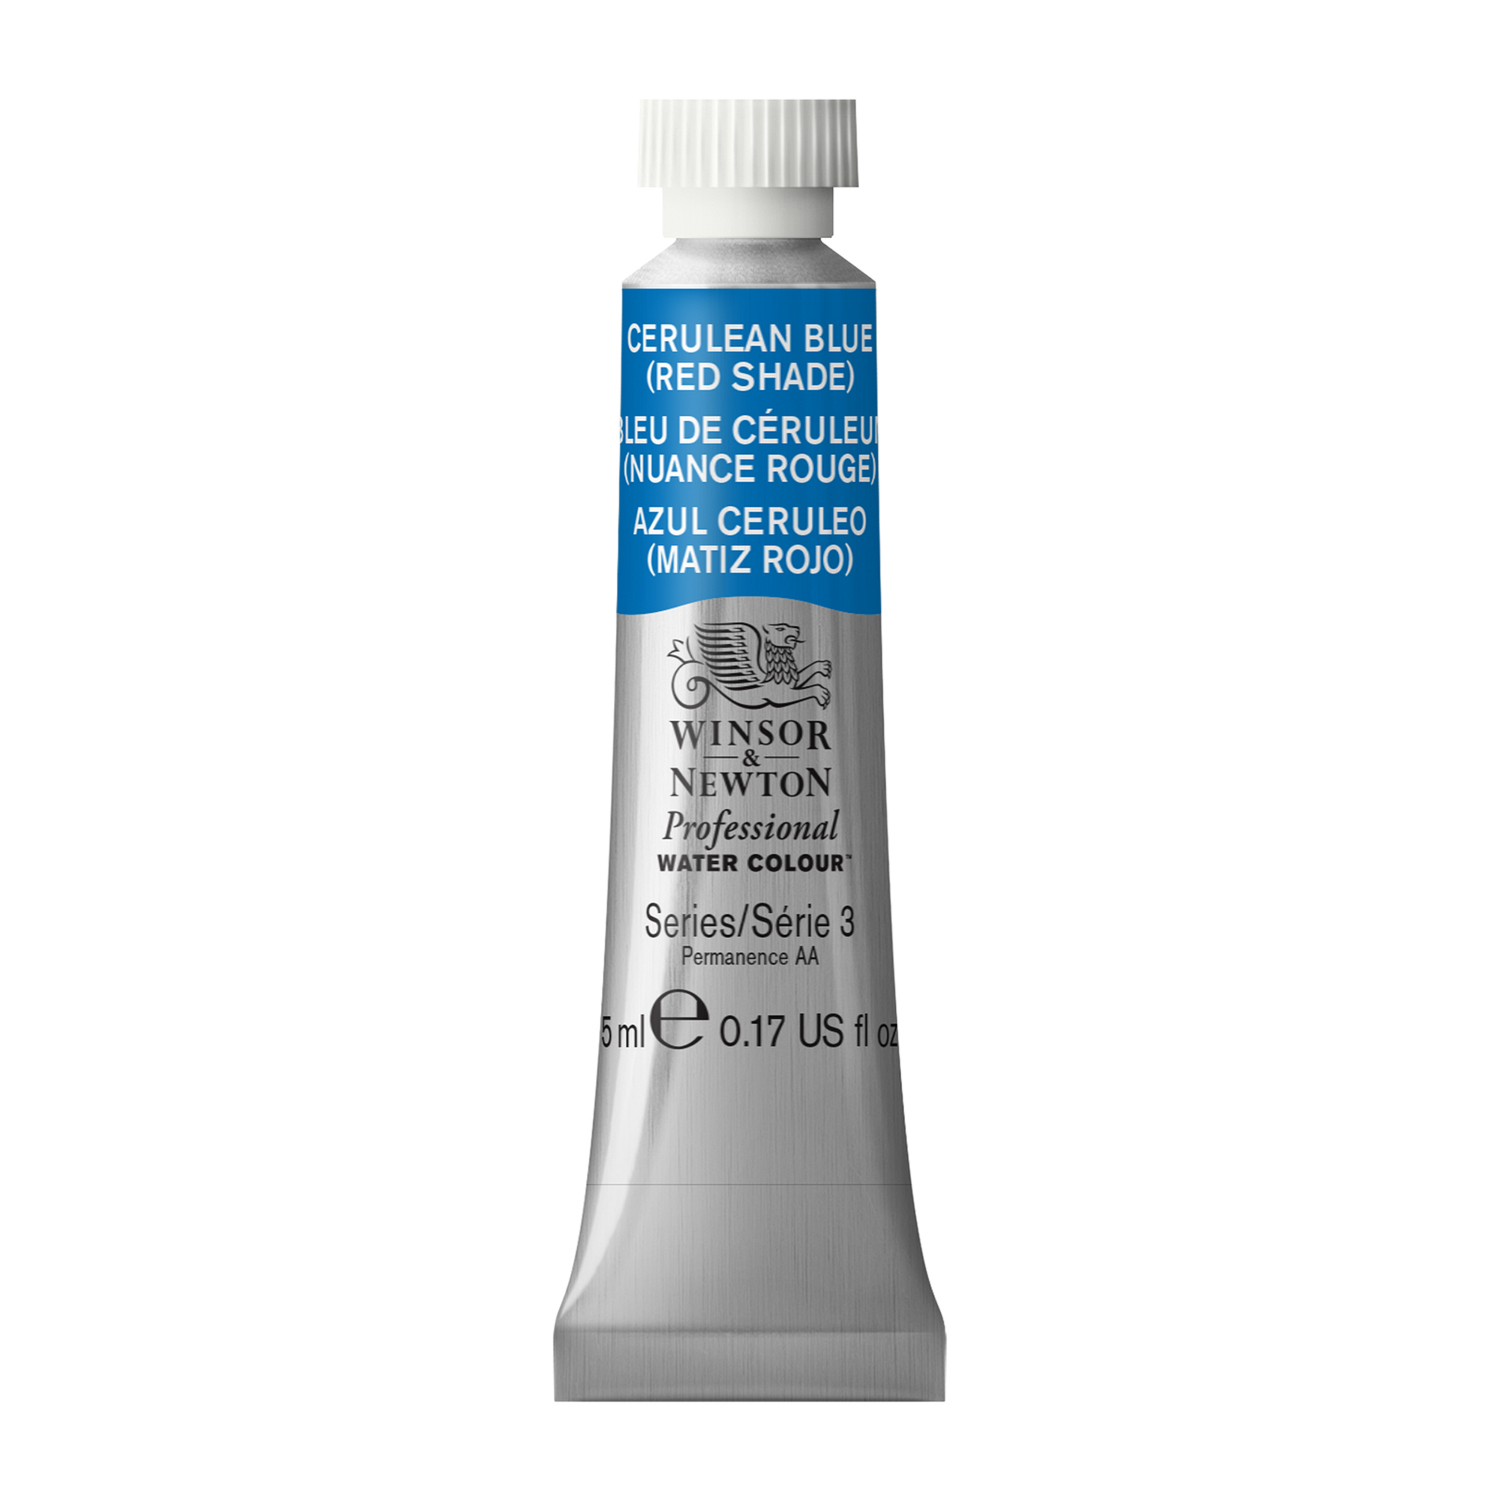 Winsor and Newton 5ml Professional Watercolour Paint - Cerulean Blue Image